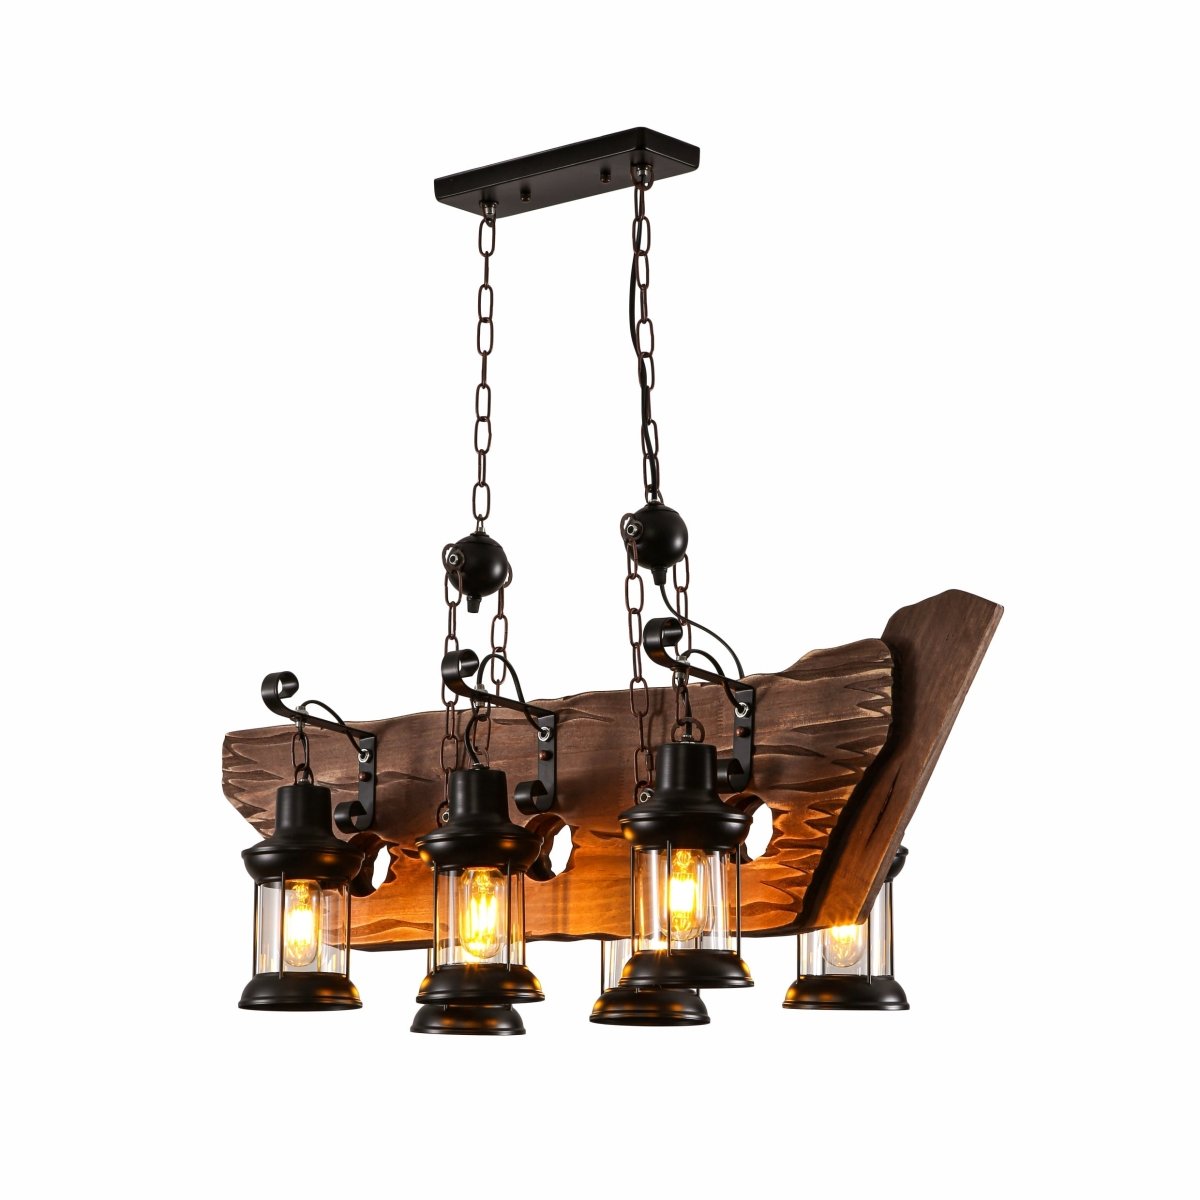 Main image of Galley Iron and Wood Glass Cylinder Shade Island Chandelier Light 6xE27 | TEKLED 159-17842